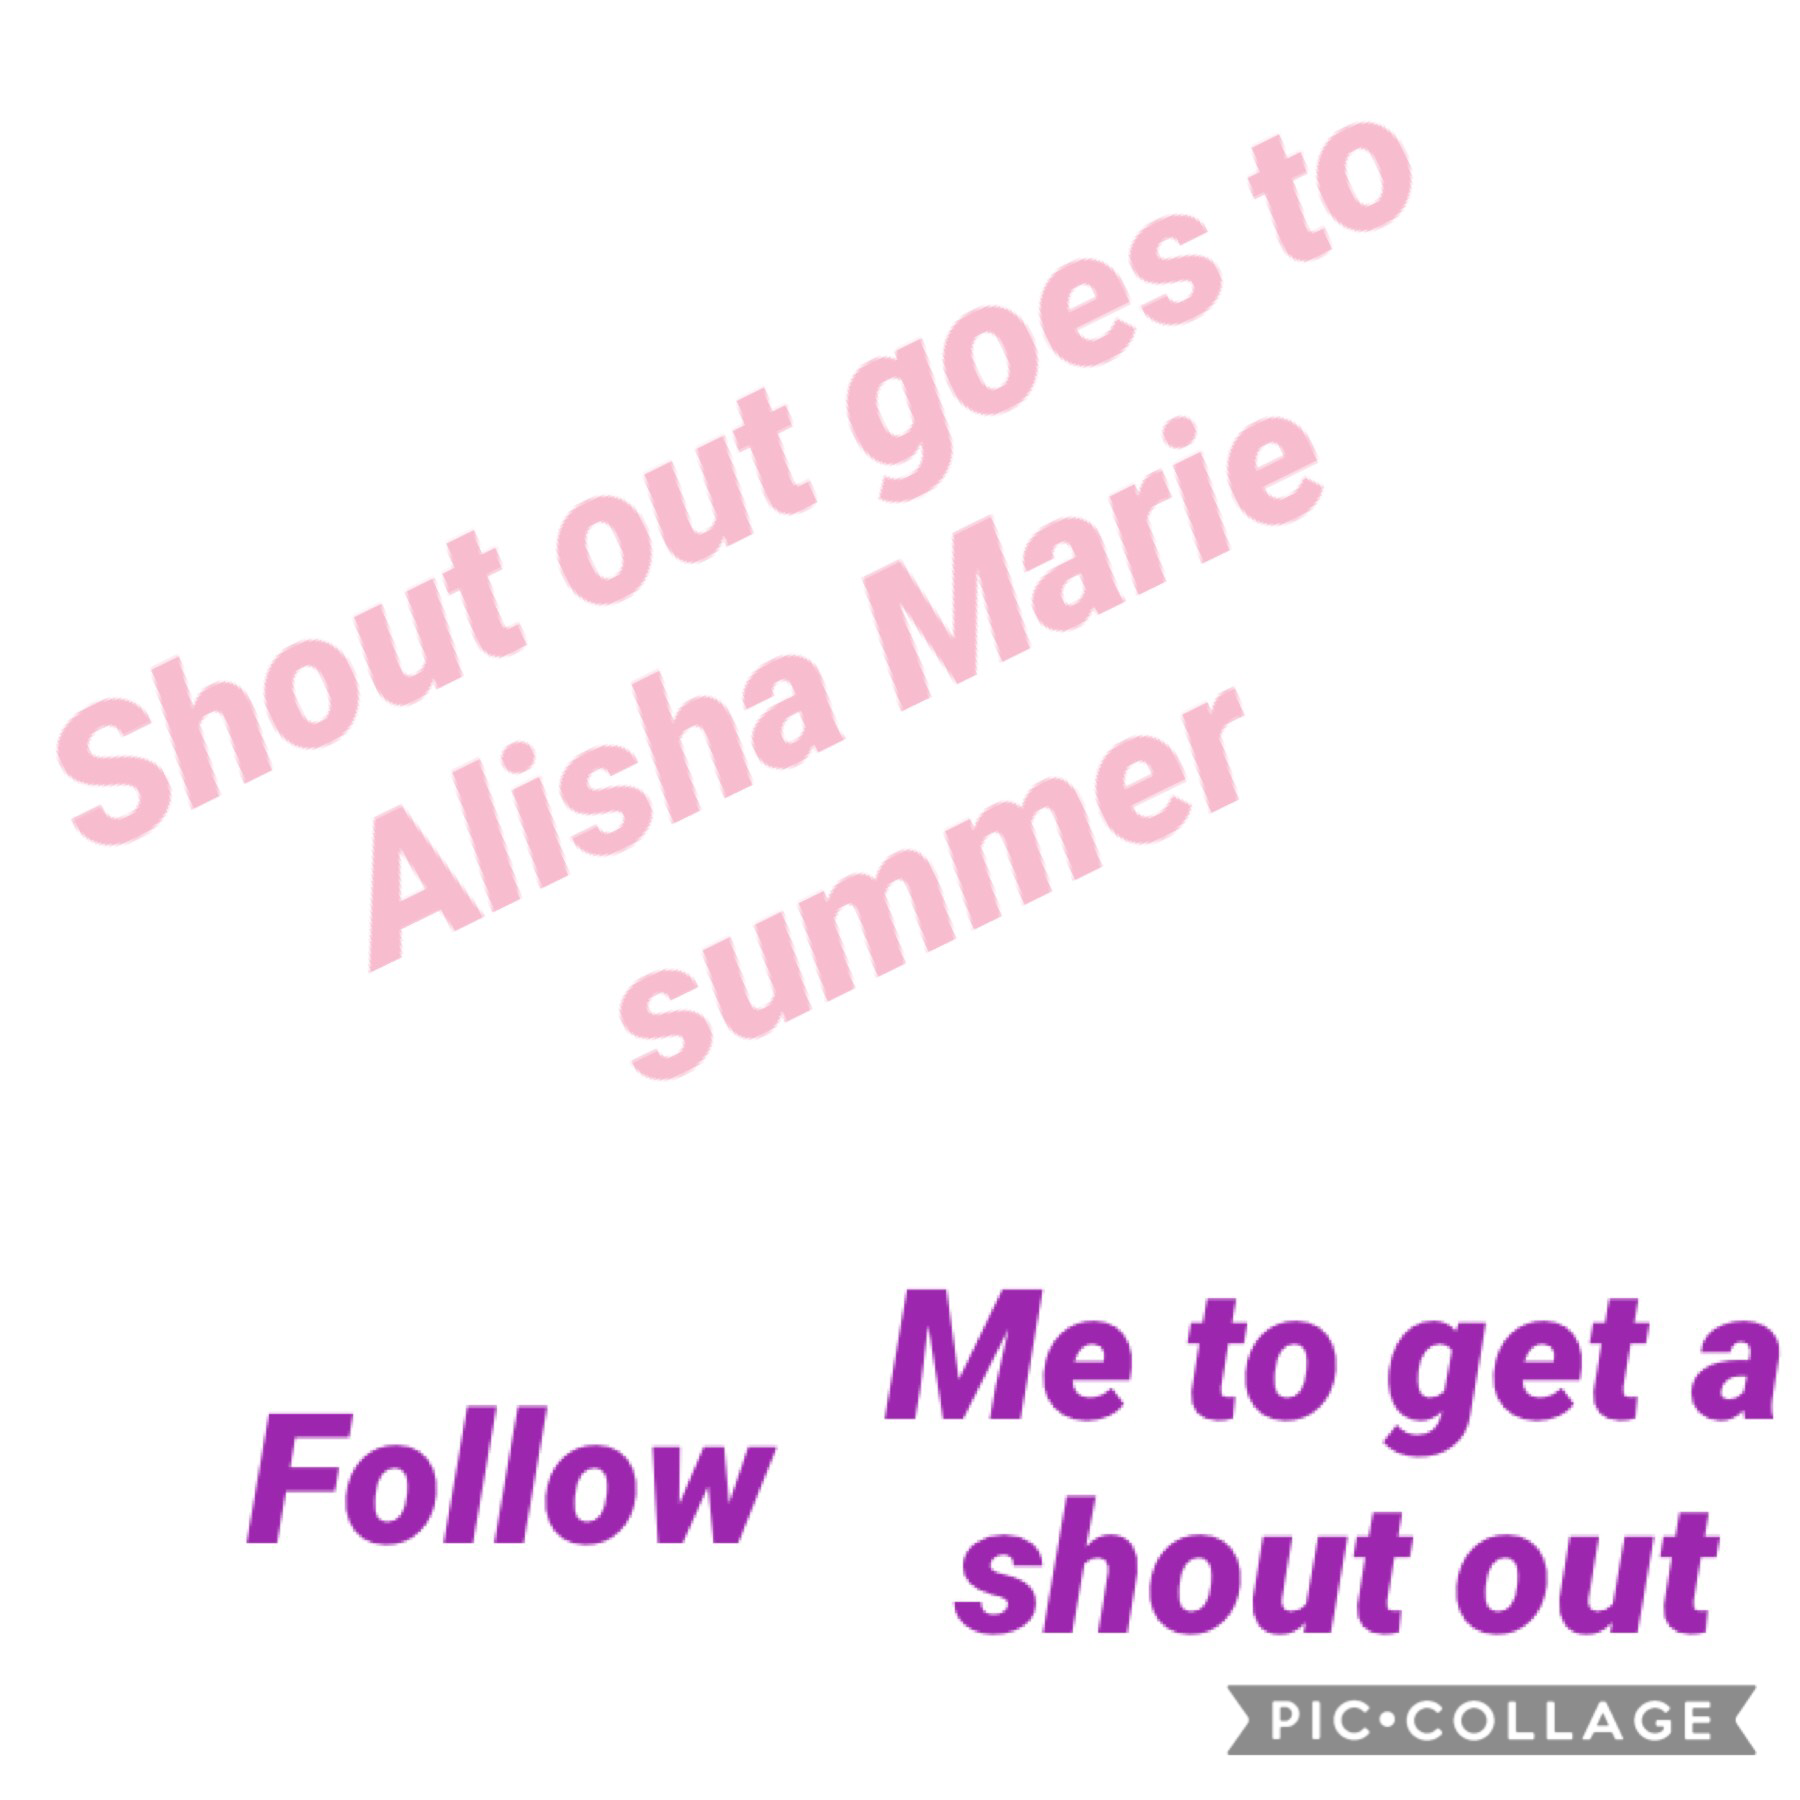 All you have to do is follow to get a shoutout 